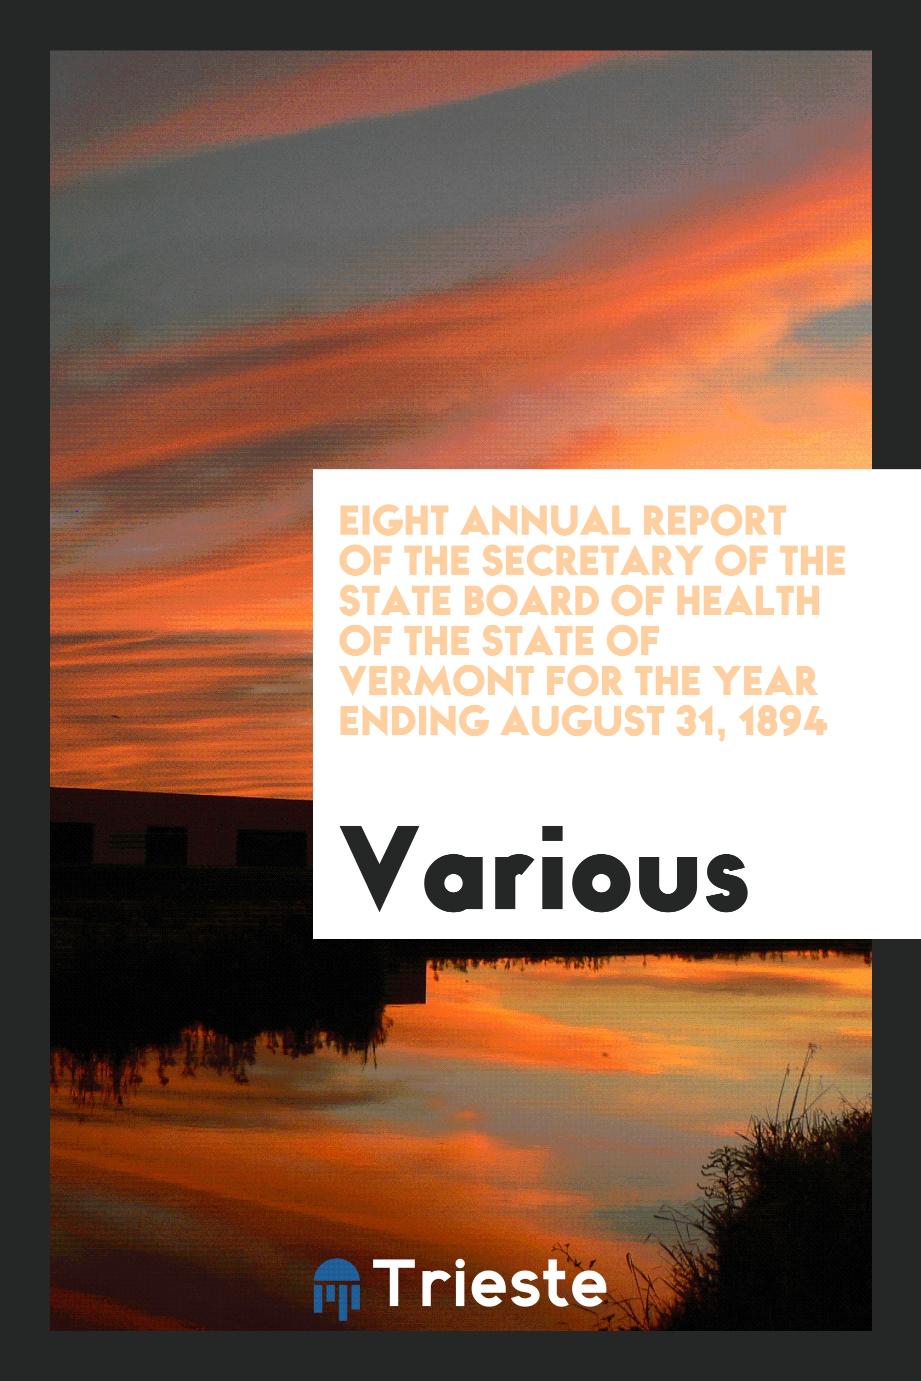 Eight Annual Report of the Secretary of the State Board of Health of the State of Vermont for the Year Ending August 31, 1894